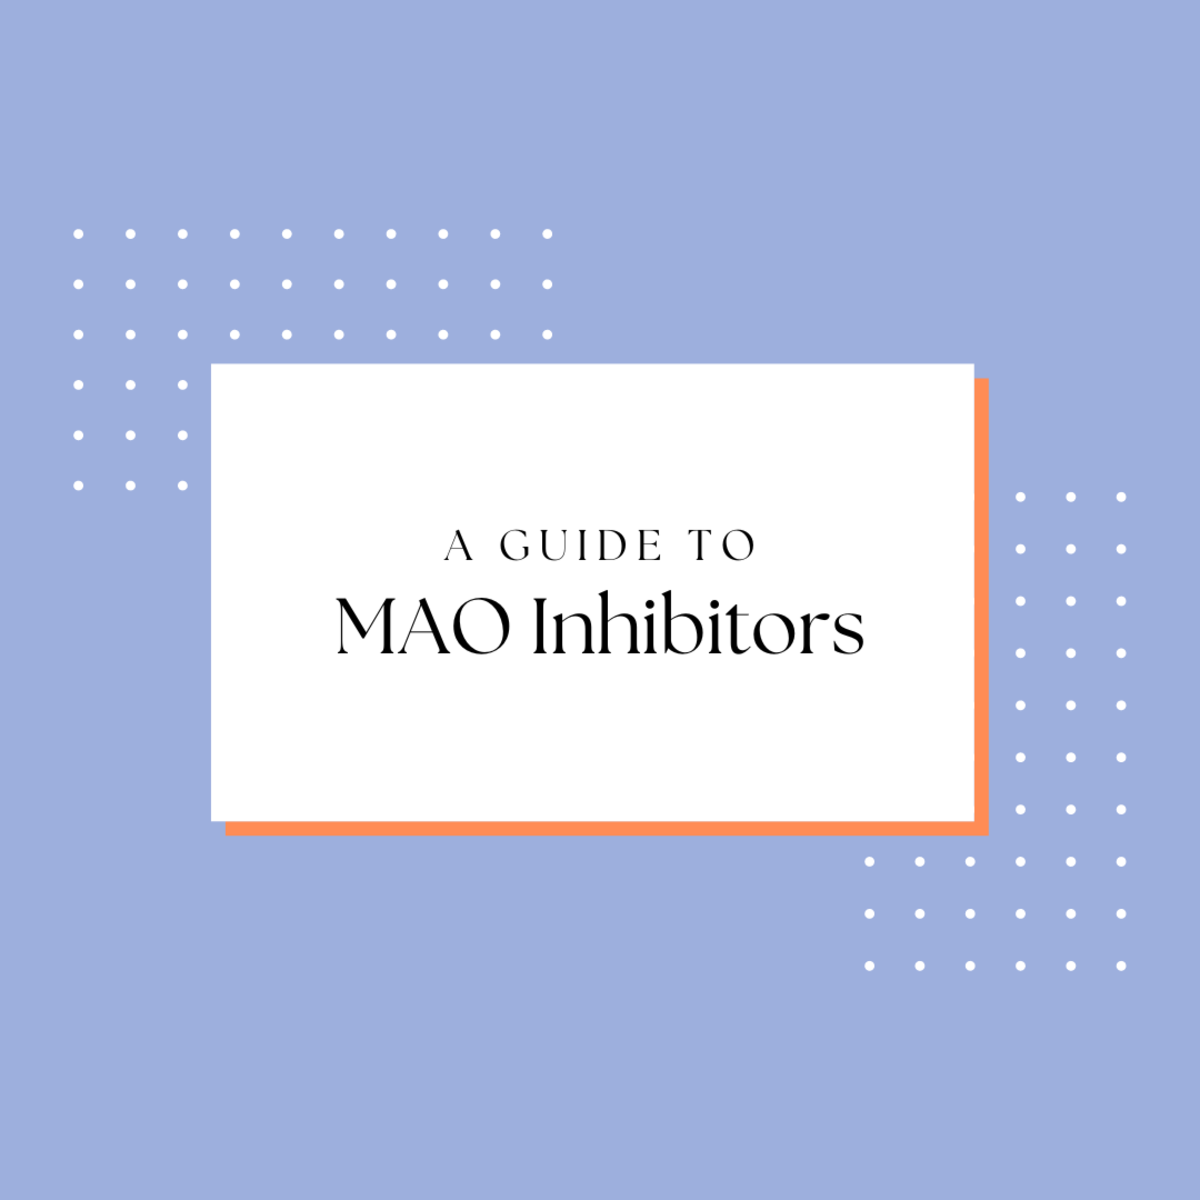 What is an MAO inhibitor? What does it treat, how does it work, and what are the risks associated with taking it?